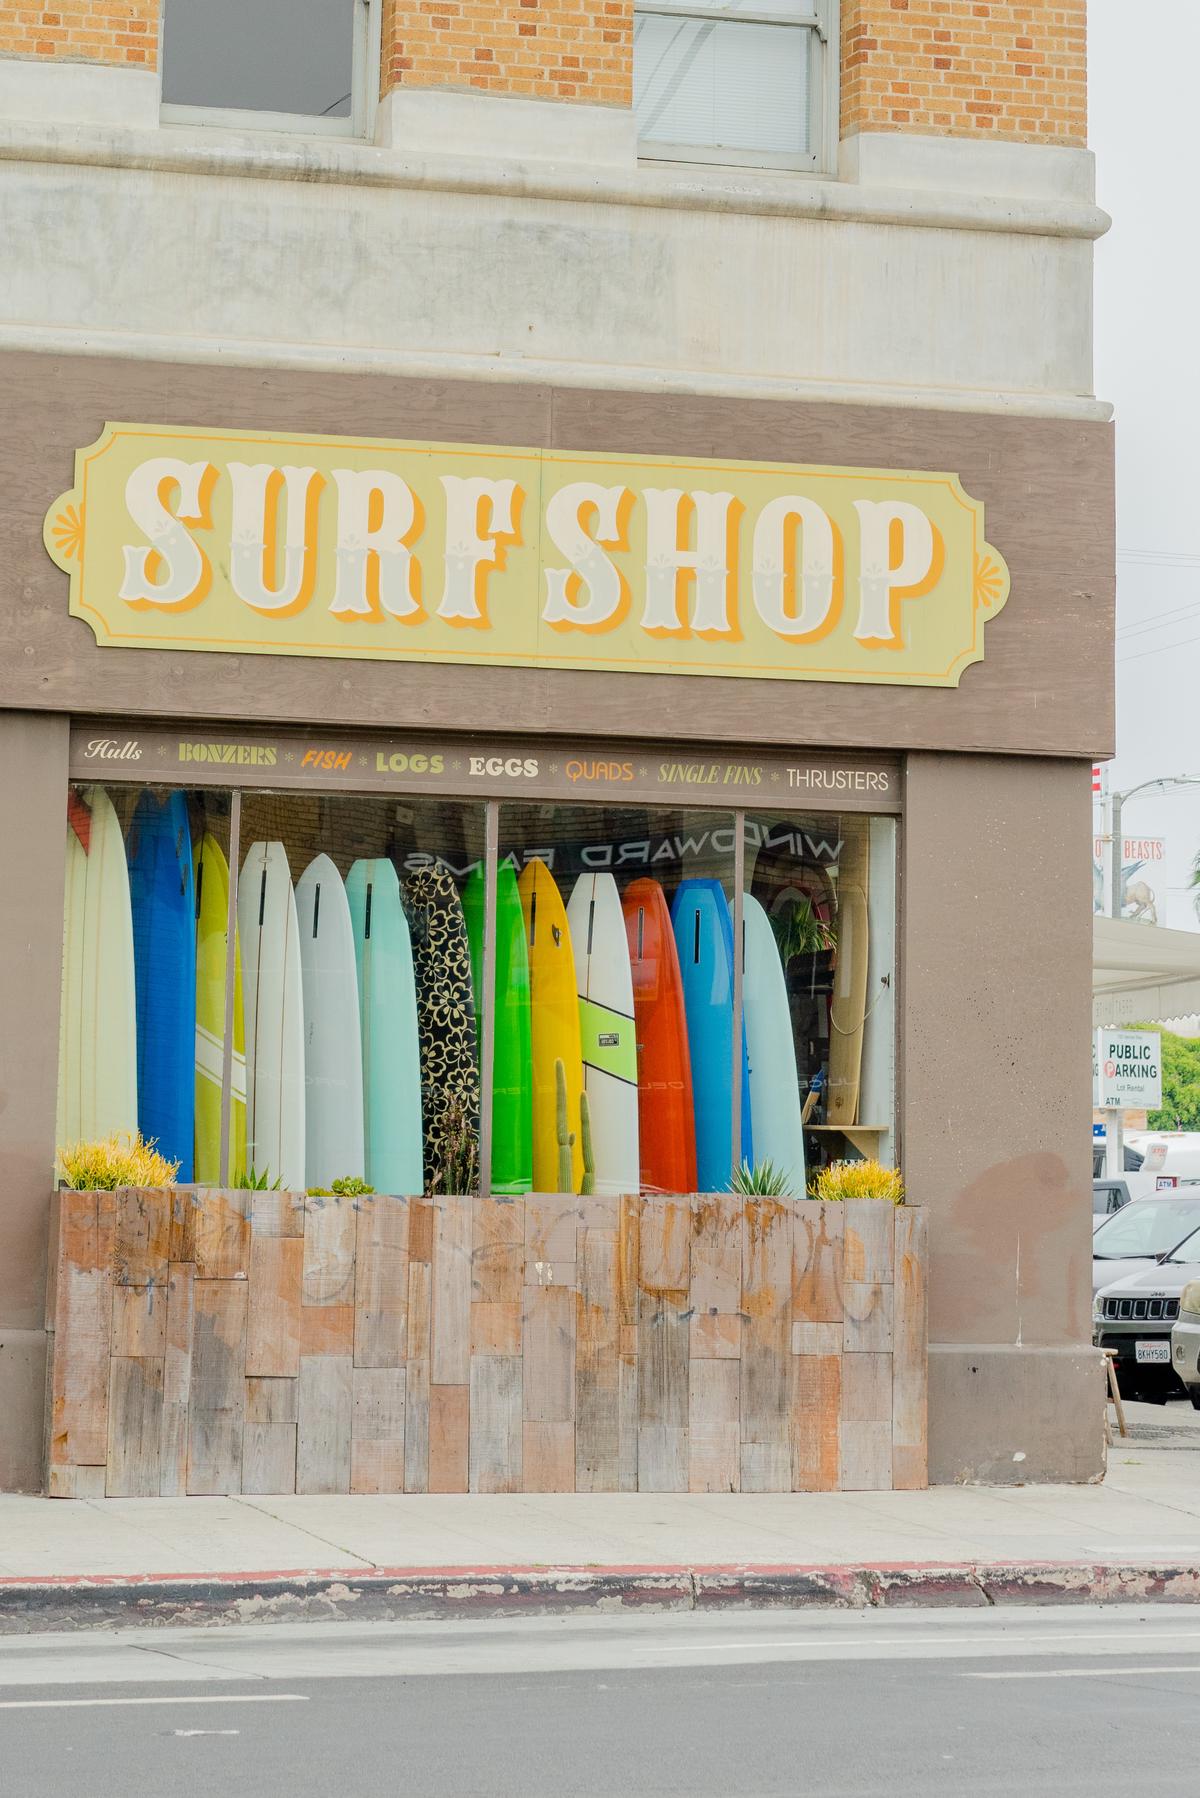 A photo of a modern surf shop building with a banner that reads PB Surf Shop in front, with bikes parked outside. This shop is located in a beach town and has a relaxed atmosphere.